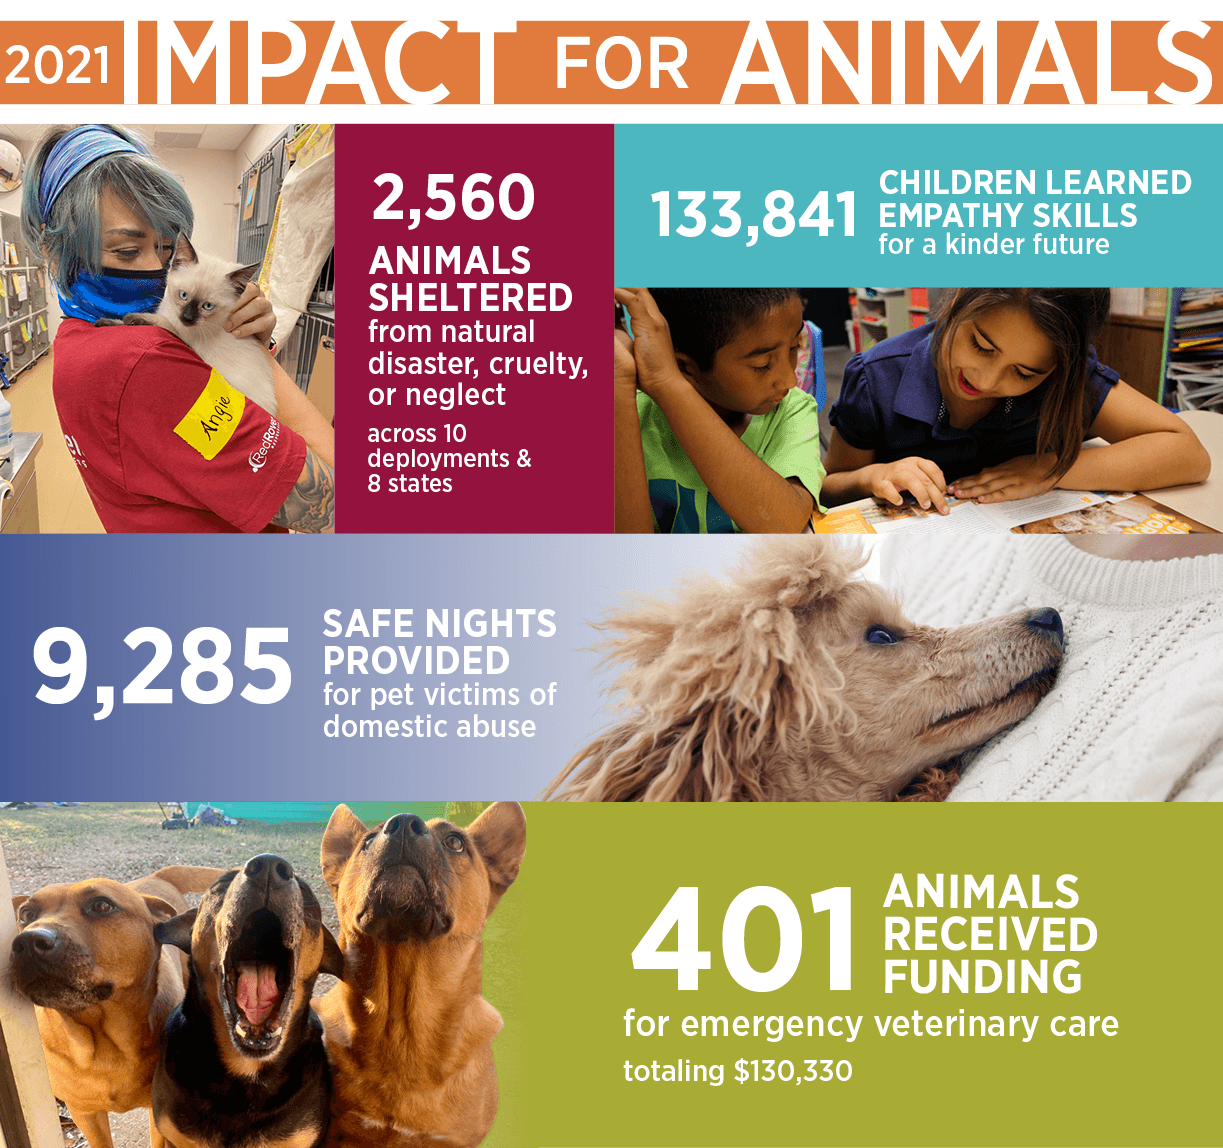 2021 impact for animals. 2,560 animals sheltered from natural disaster, cruelty, or neglect across 10 deployments and 8 states. 133,841 children learned empathy skills for a kinder future. 9,285 safe nights provided for pet victims of domestic abuse. 40-1 animals received funding for emergency veterinary care totaling $130,330. 